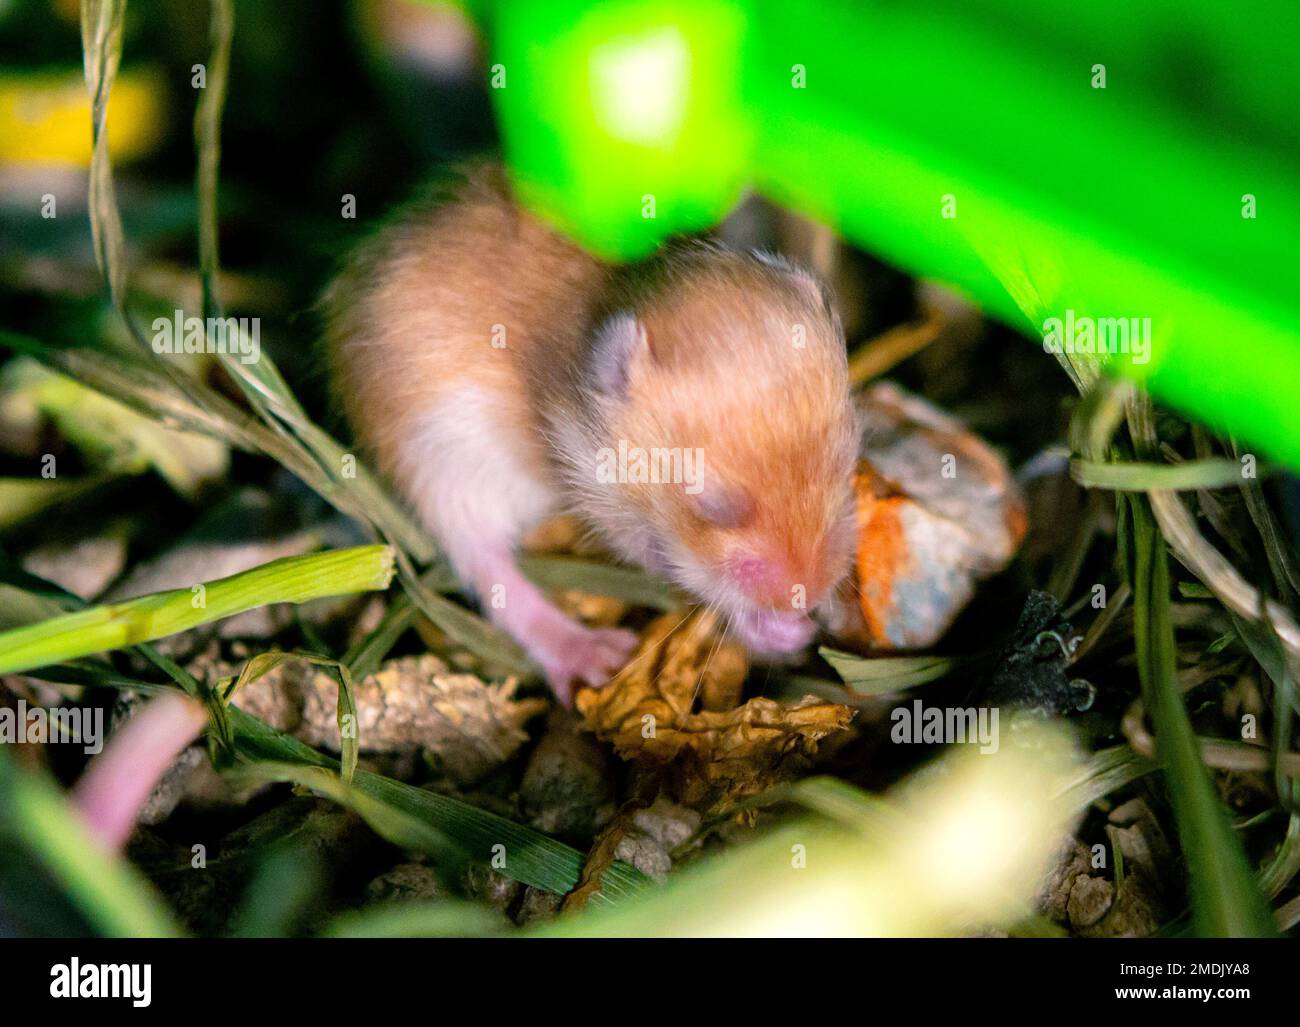 Hamster nest close-up. Many small hamsters in grass nest. Newborn hamsters. Little rodents. Pets. Syrian hamsters. Very small blind hamsters. Reproduction and breeding of domestic animals. Rodent cubs Stock Photo